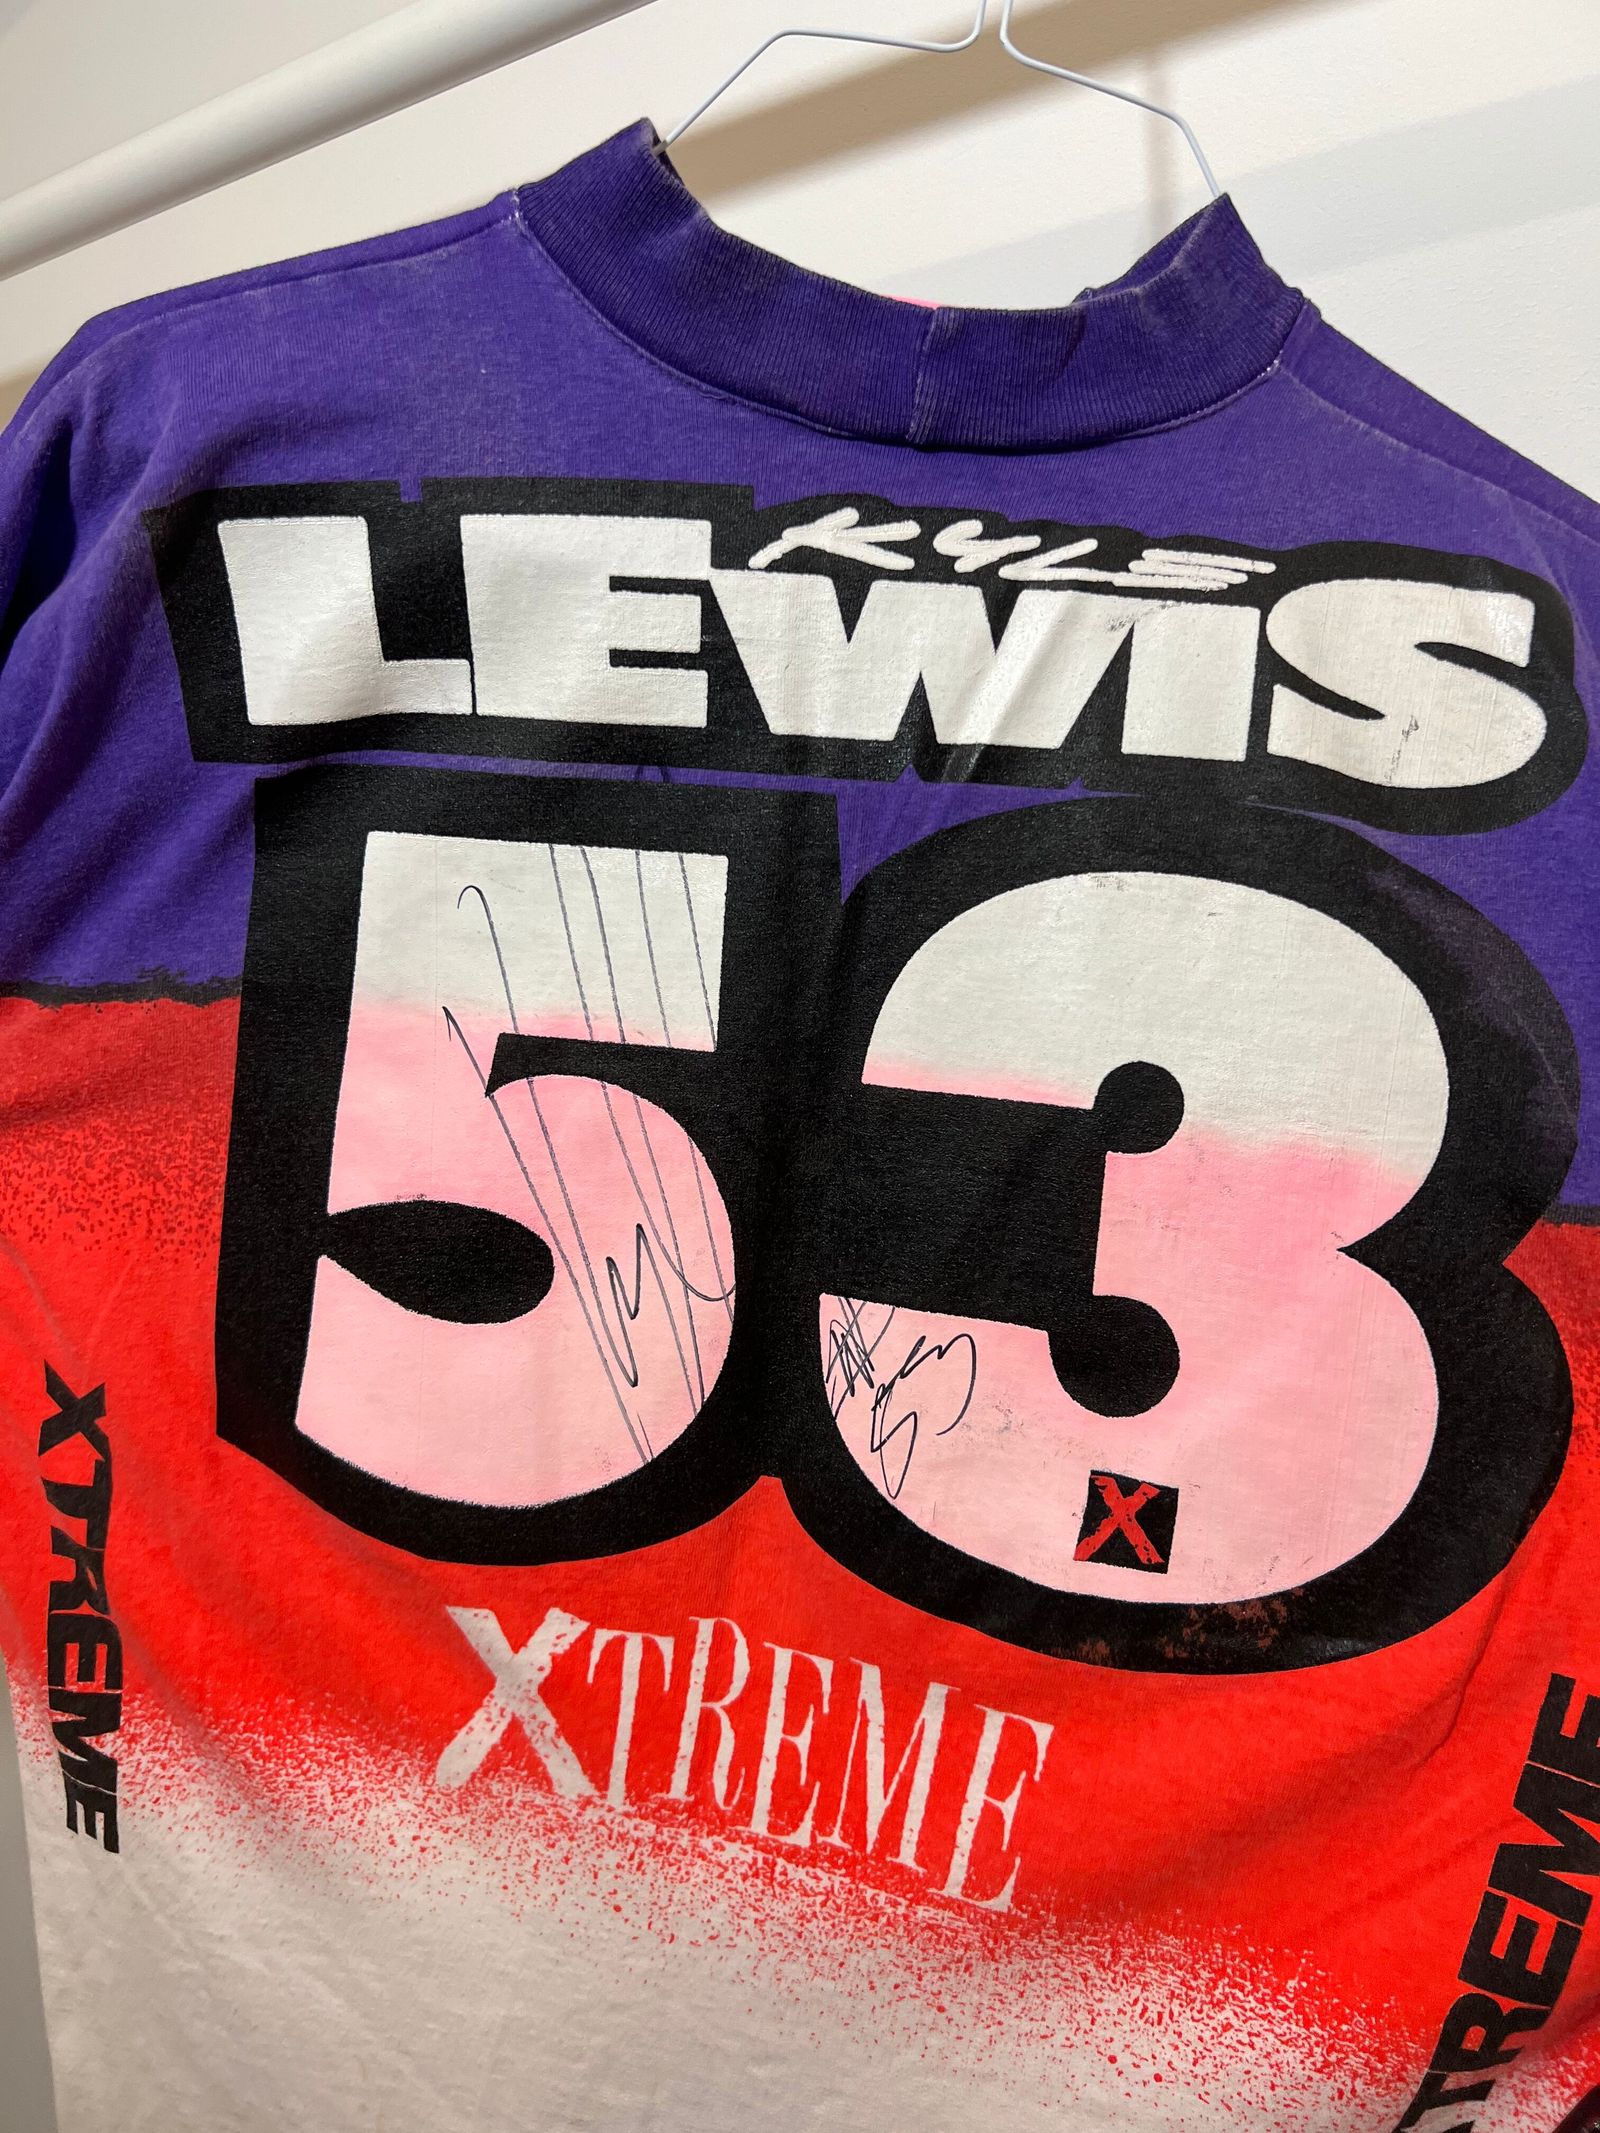 Kyle Lewis Jersey, Kyle Lewis Gear and Apparel